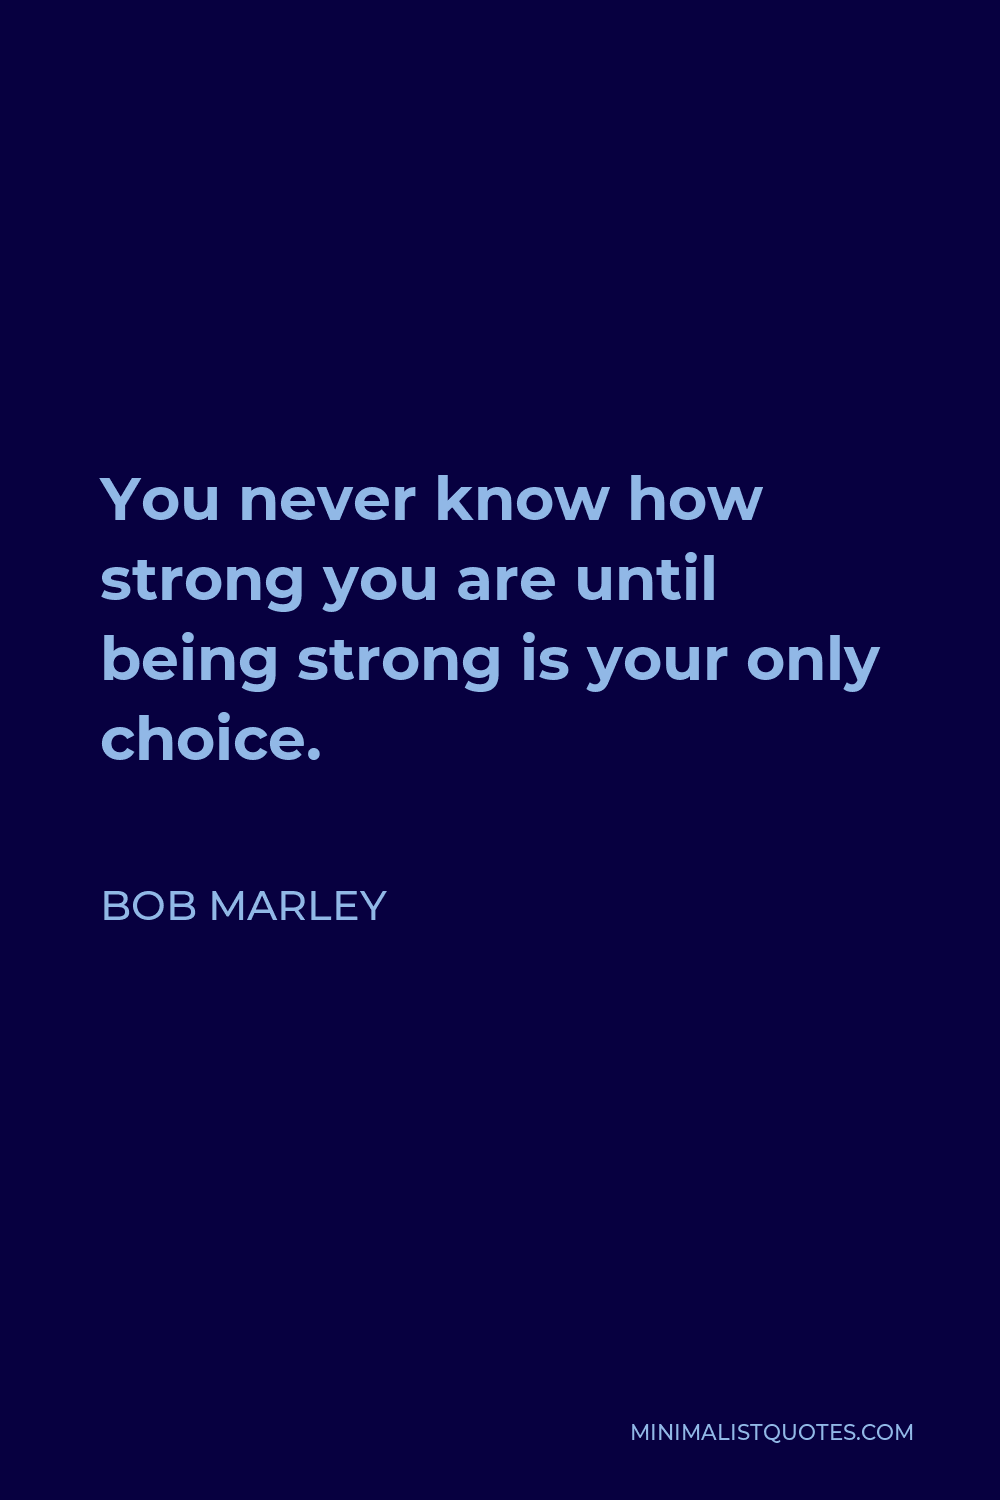 Bob Marley Quote - You never know how strong you are until being strong is your only choice.